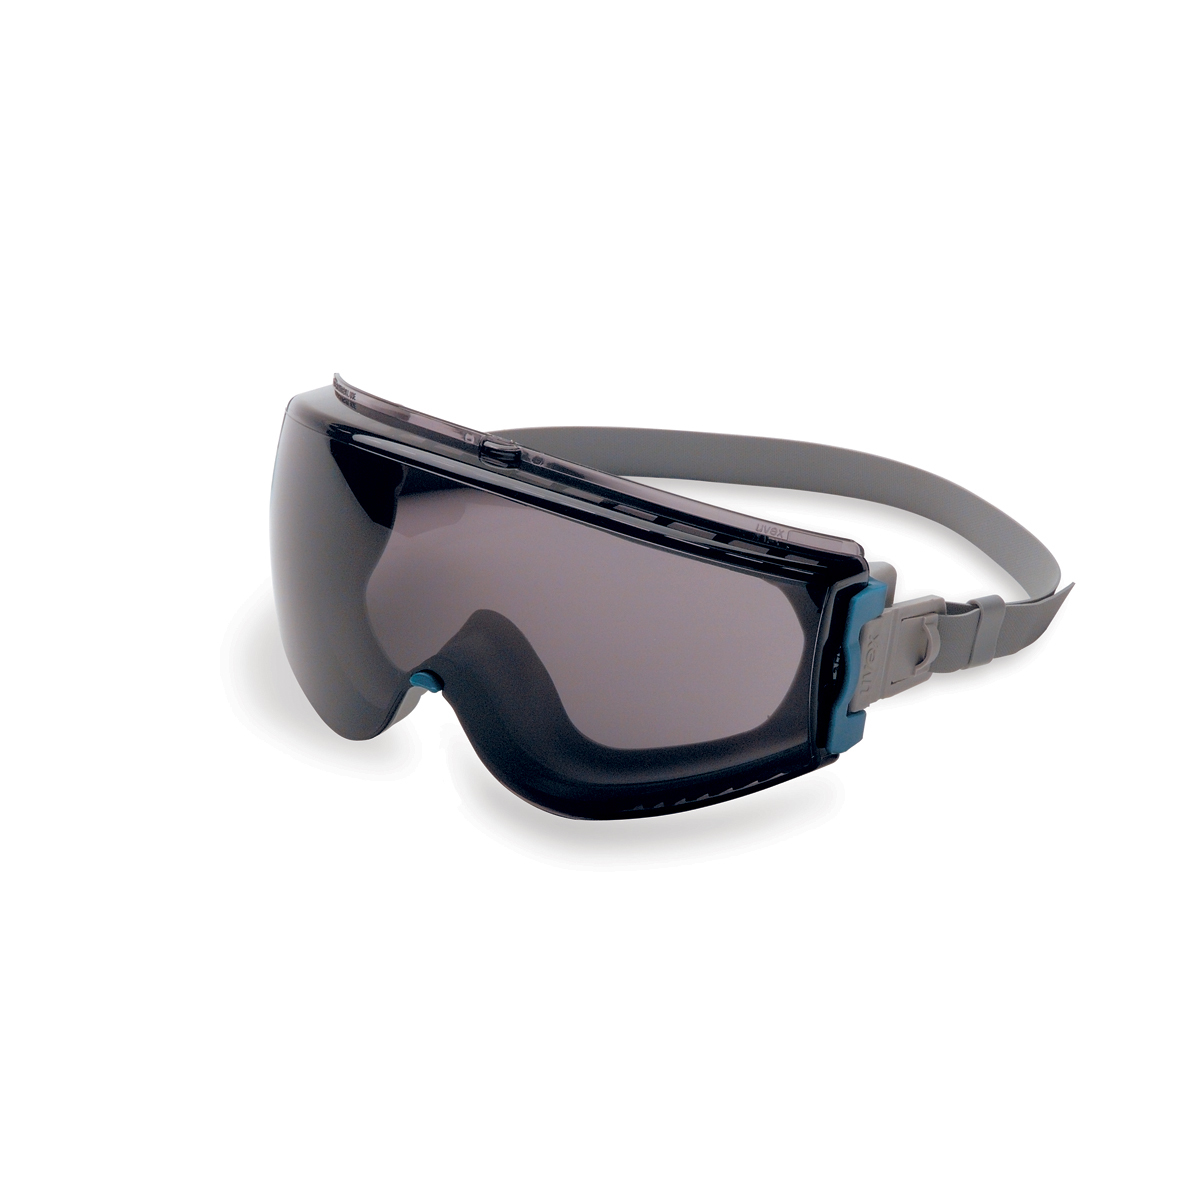 Honeywell Uvex Stealth® Indirect Vent Chemical Splash Impact Goggles With Teal Low Profile Frame And Gray HydroShield® Anti-Fog